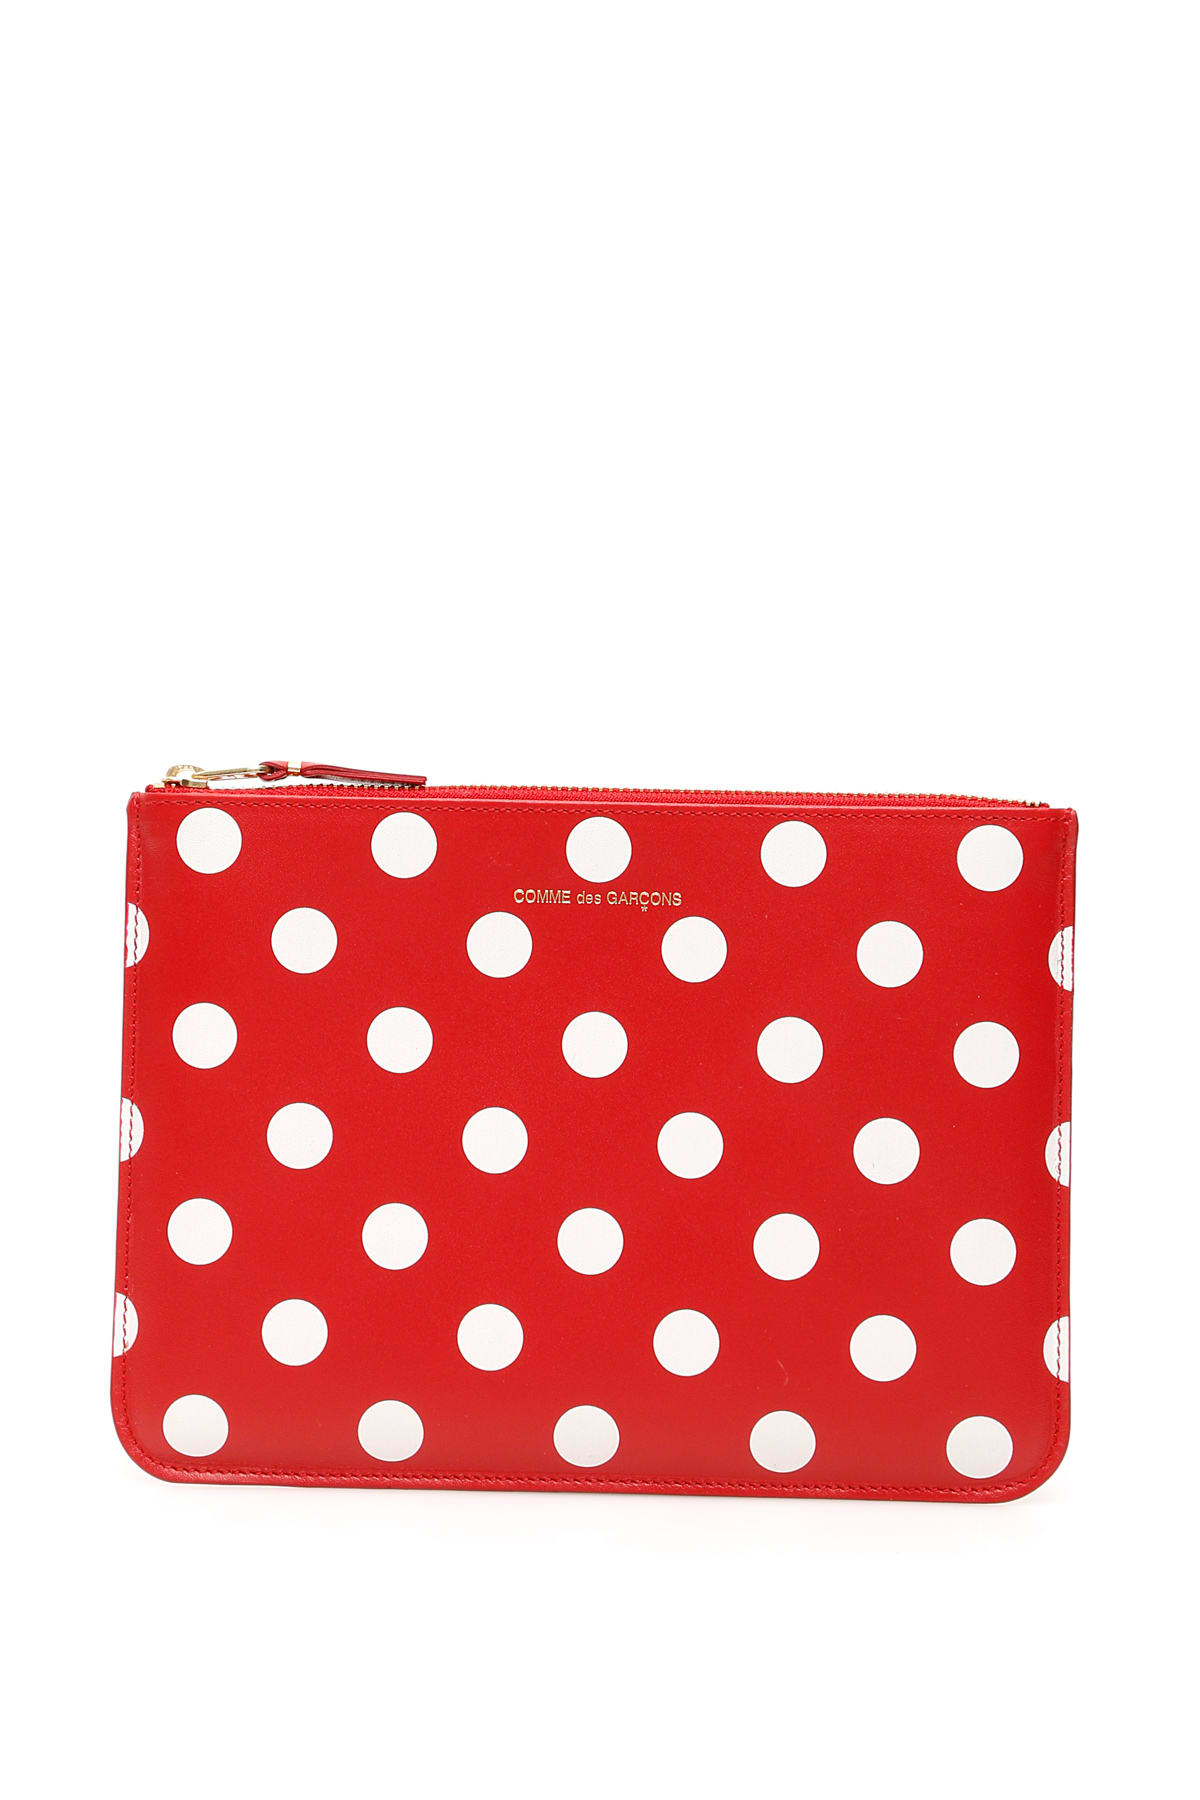 Comme Des Garçons Polka Dots Pouch In Red Red